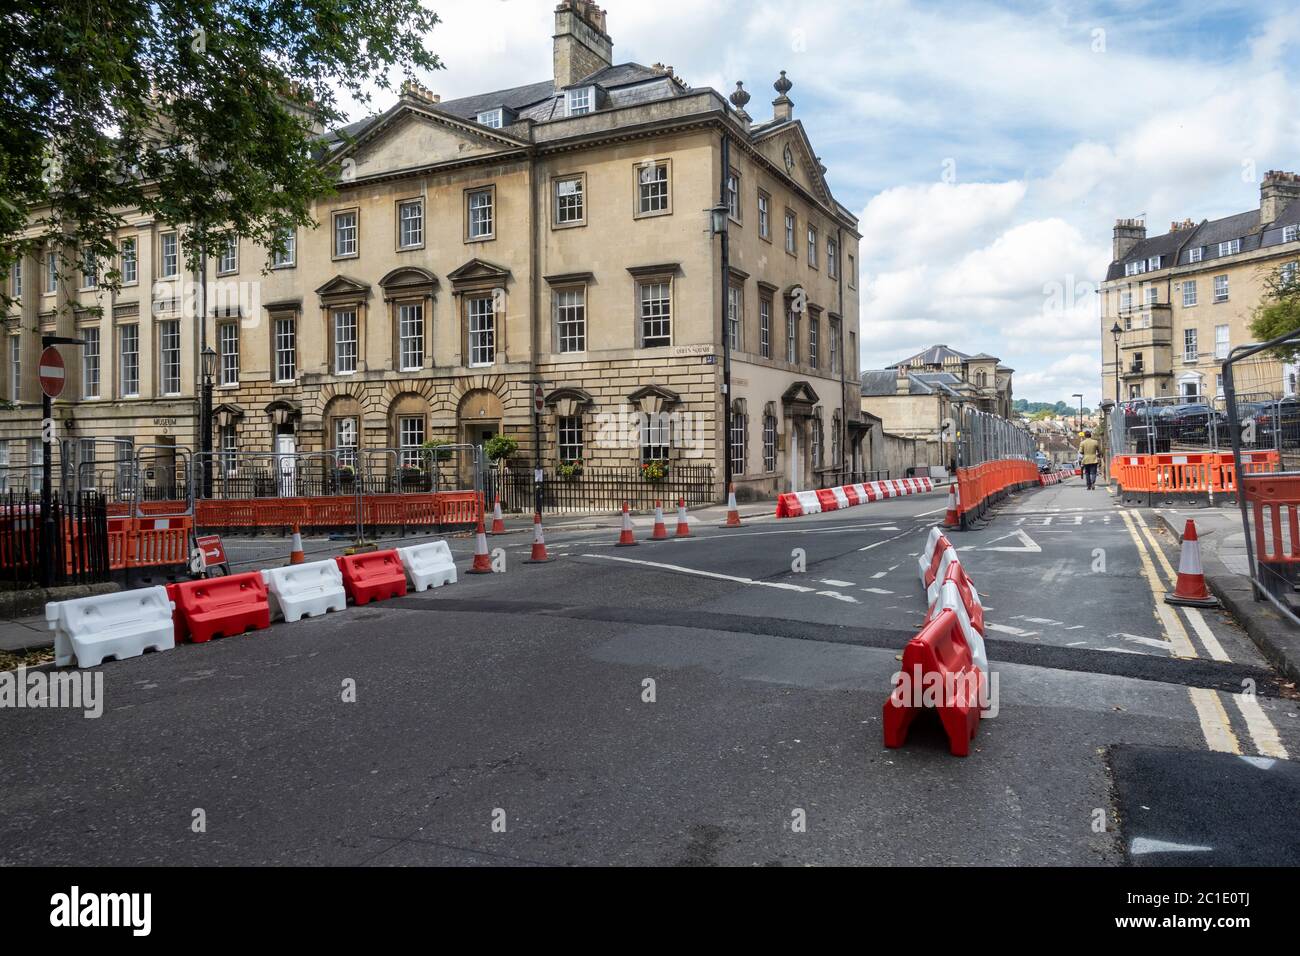 Non essential shops reopen in Bath. Pavements widened in the City with street barriiers in place so social distancing measures can be met. England, UK Stock Photo